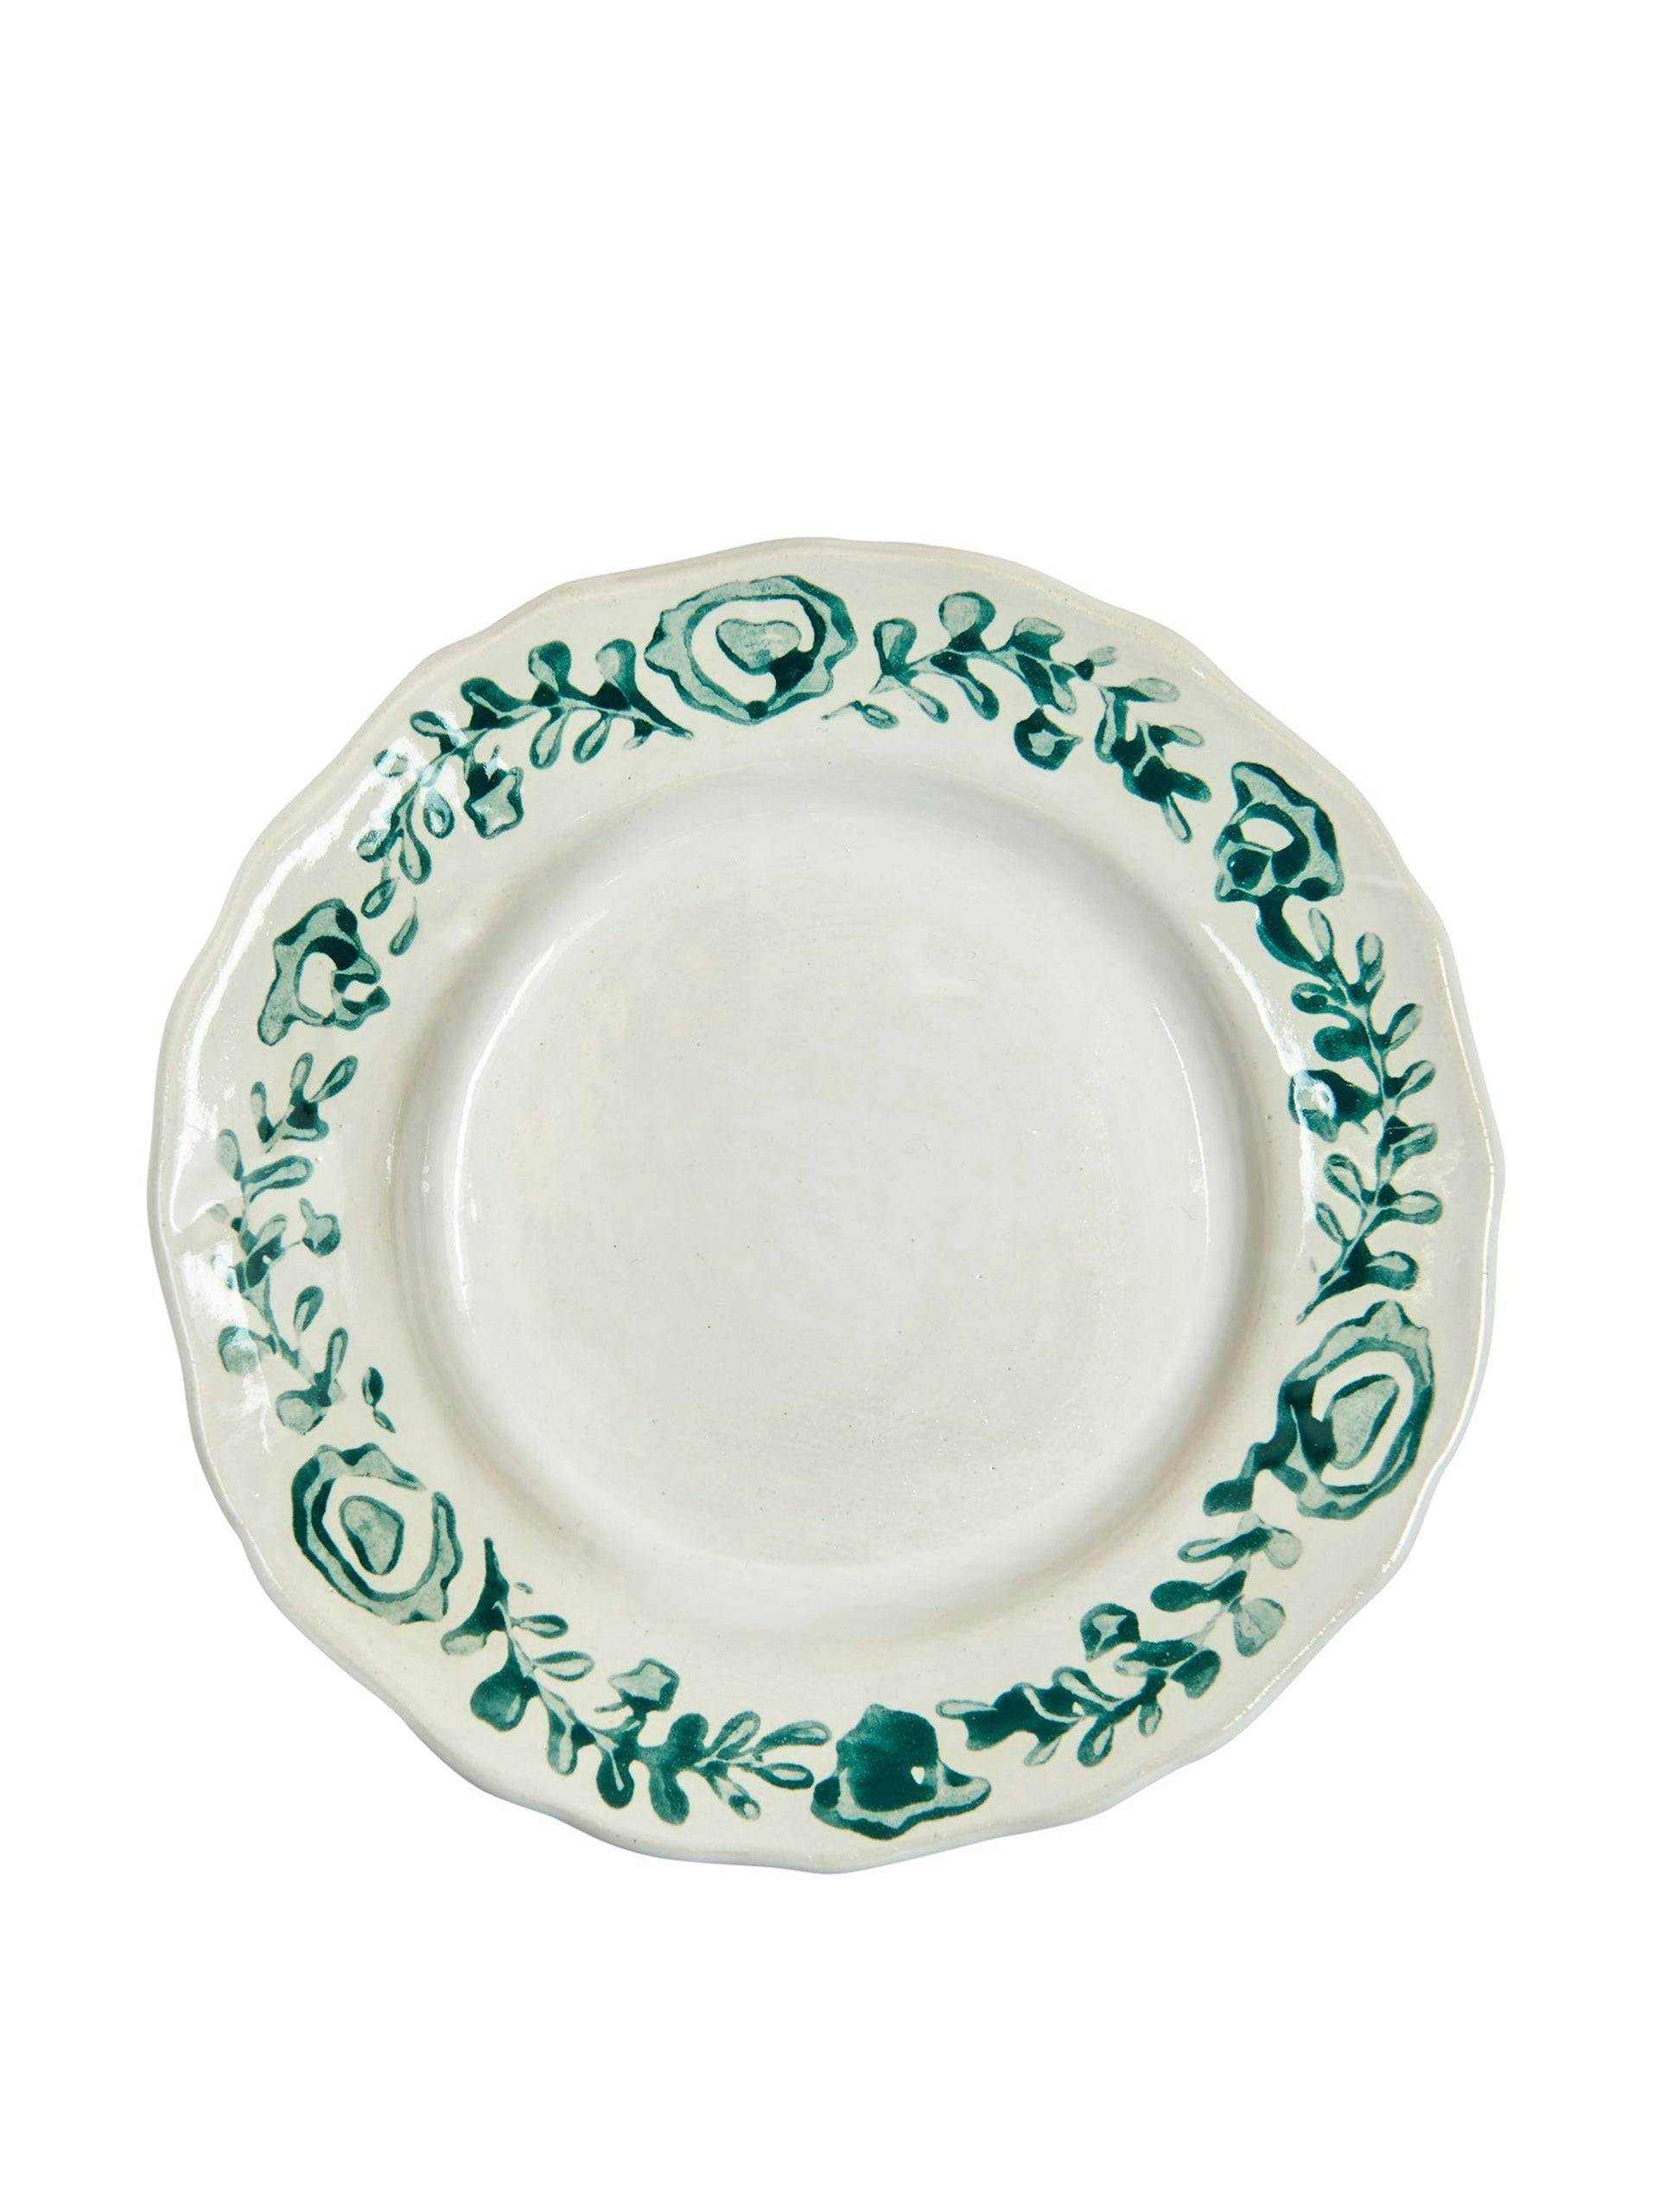 Hand-painted floral plates (set of 2)